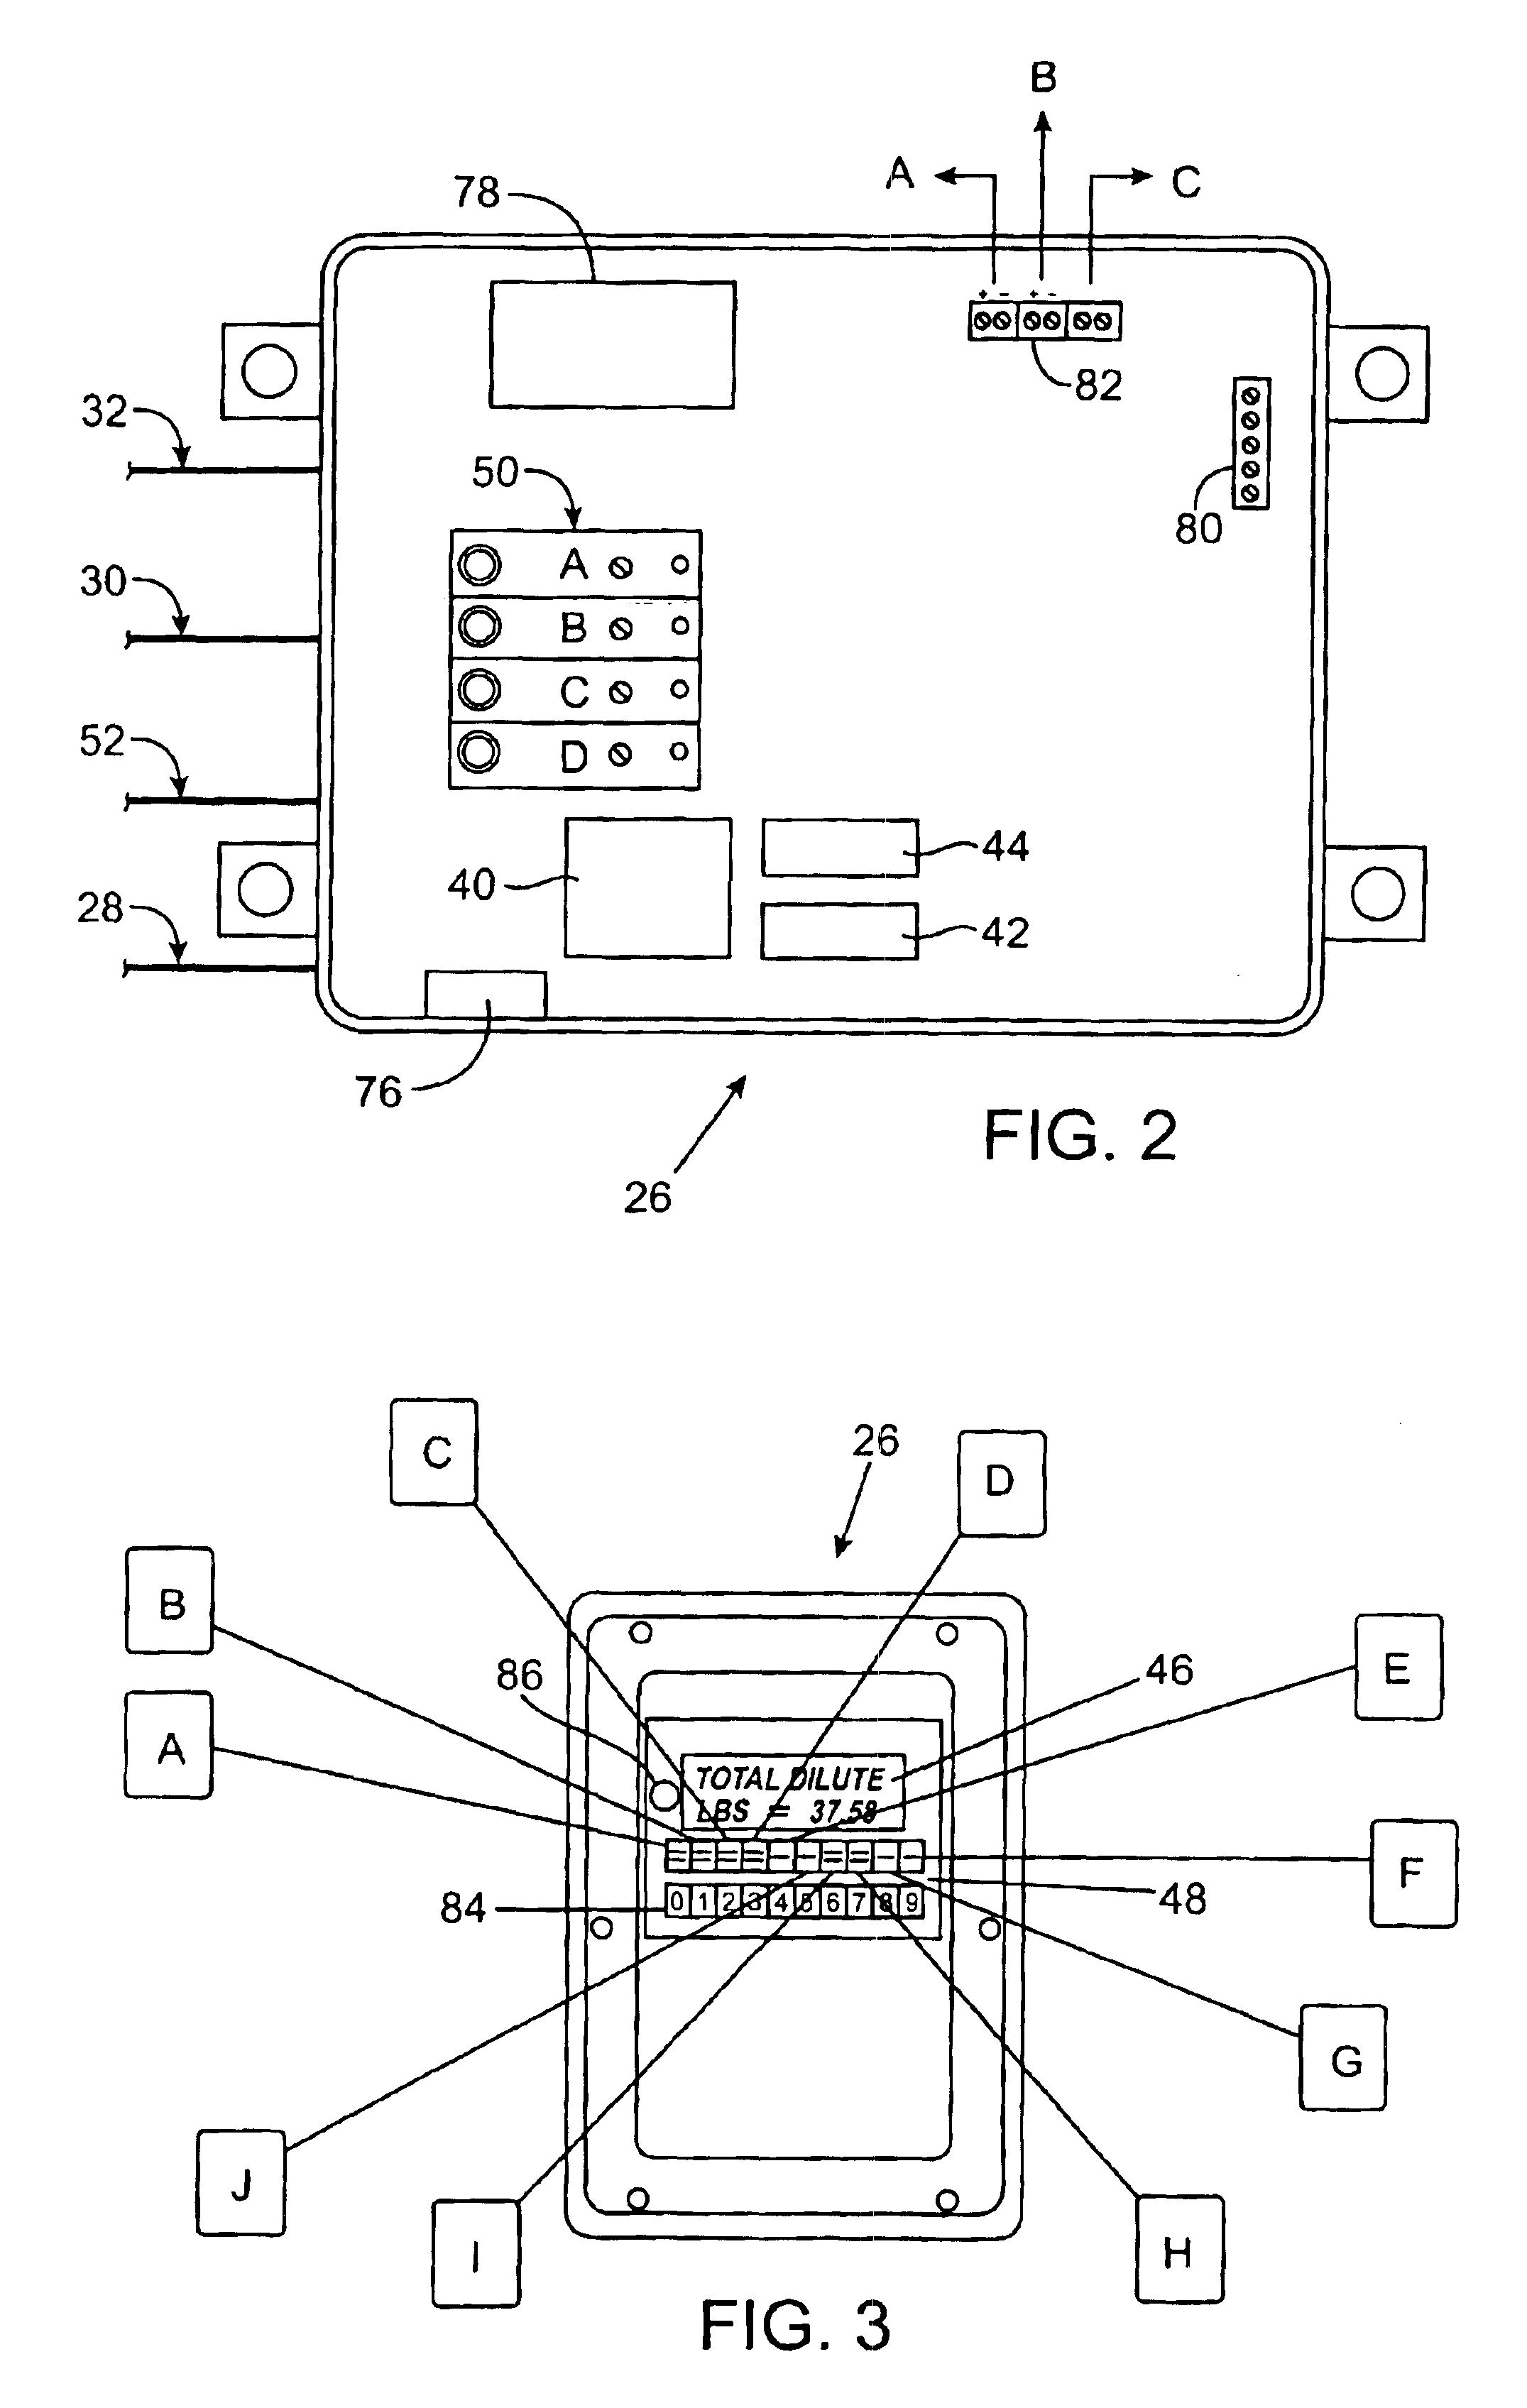 Diluting system and method